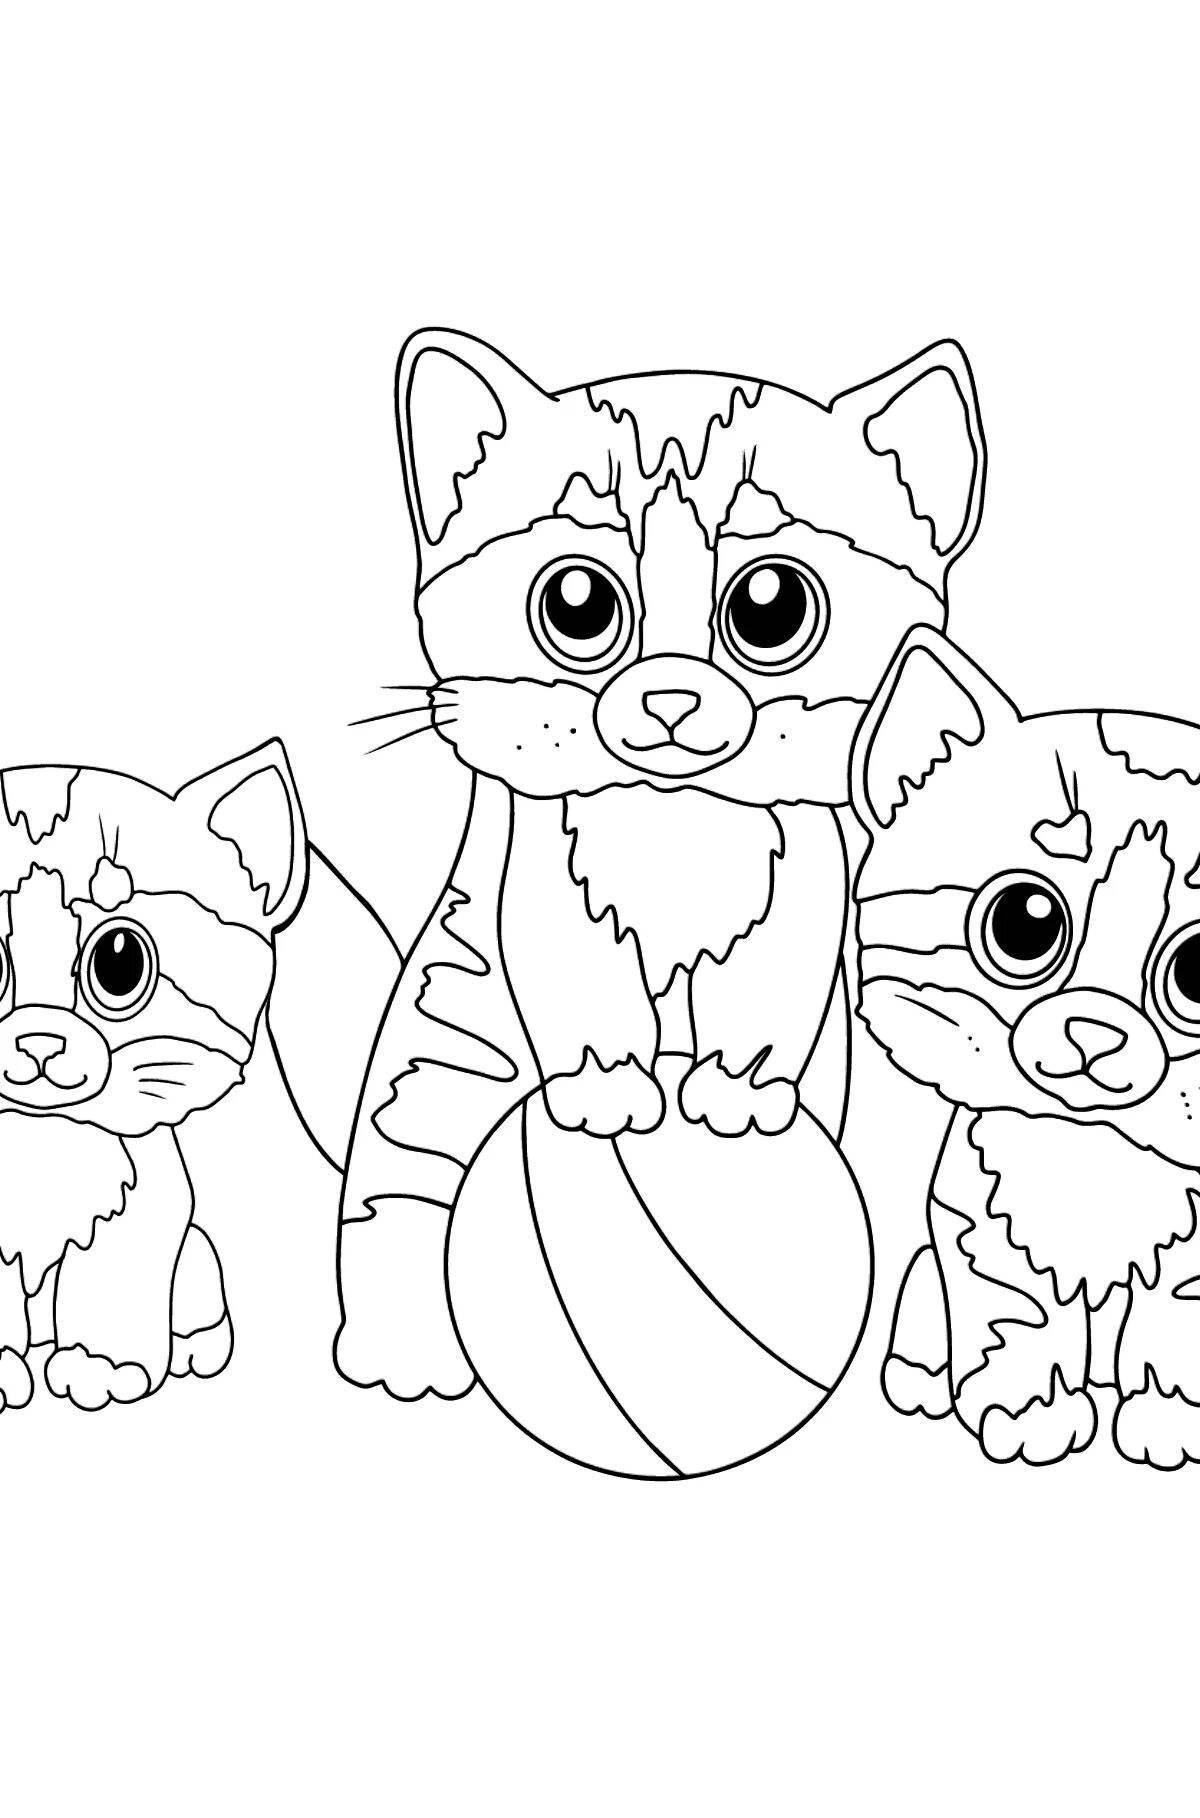 Three kittens coloring book